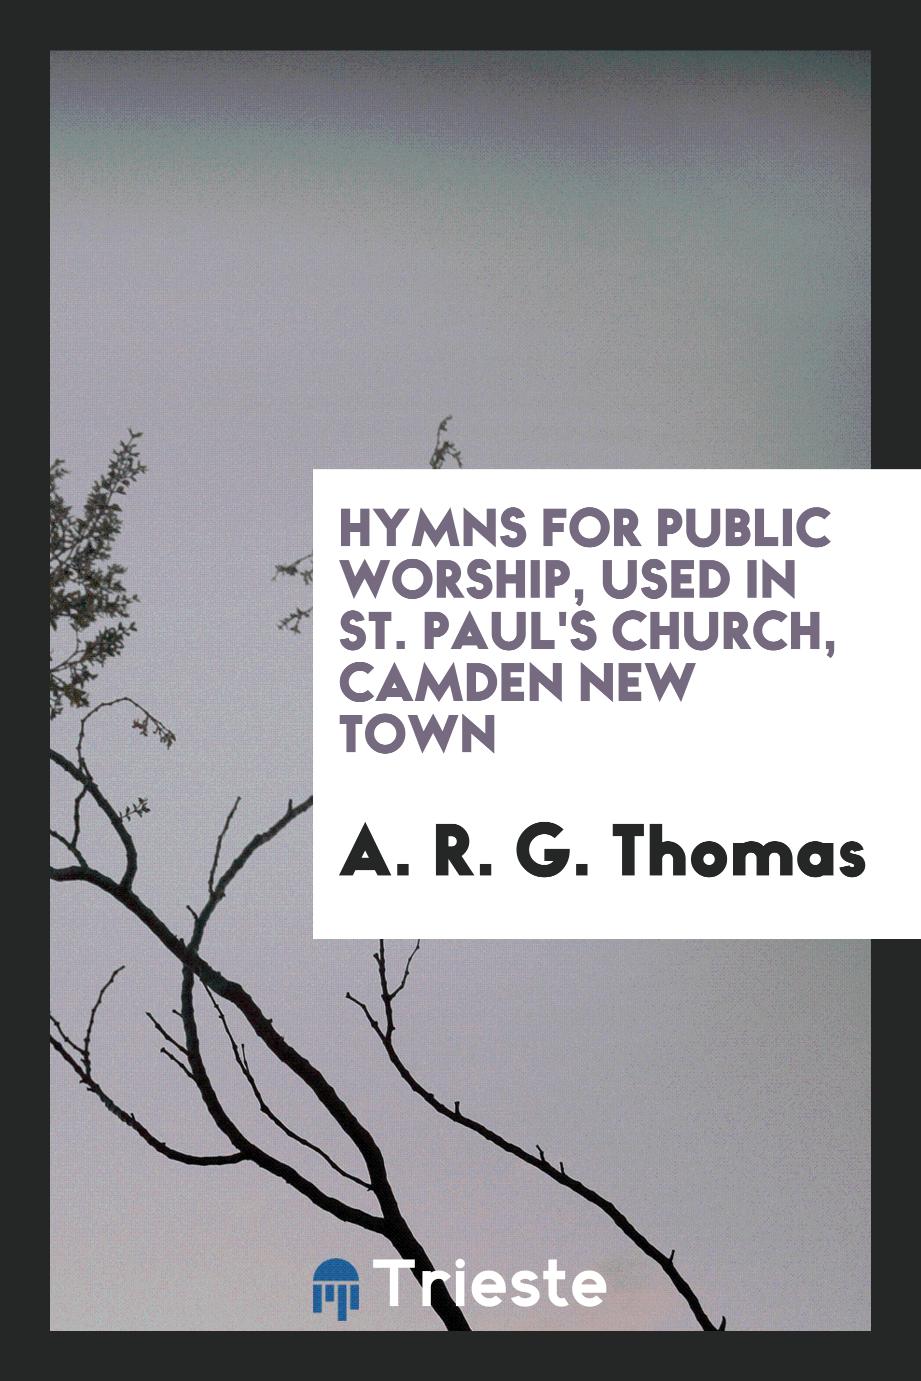 Hymns for Public Worship, Used in St. Paul's Church, Camden New Town